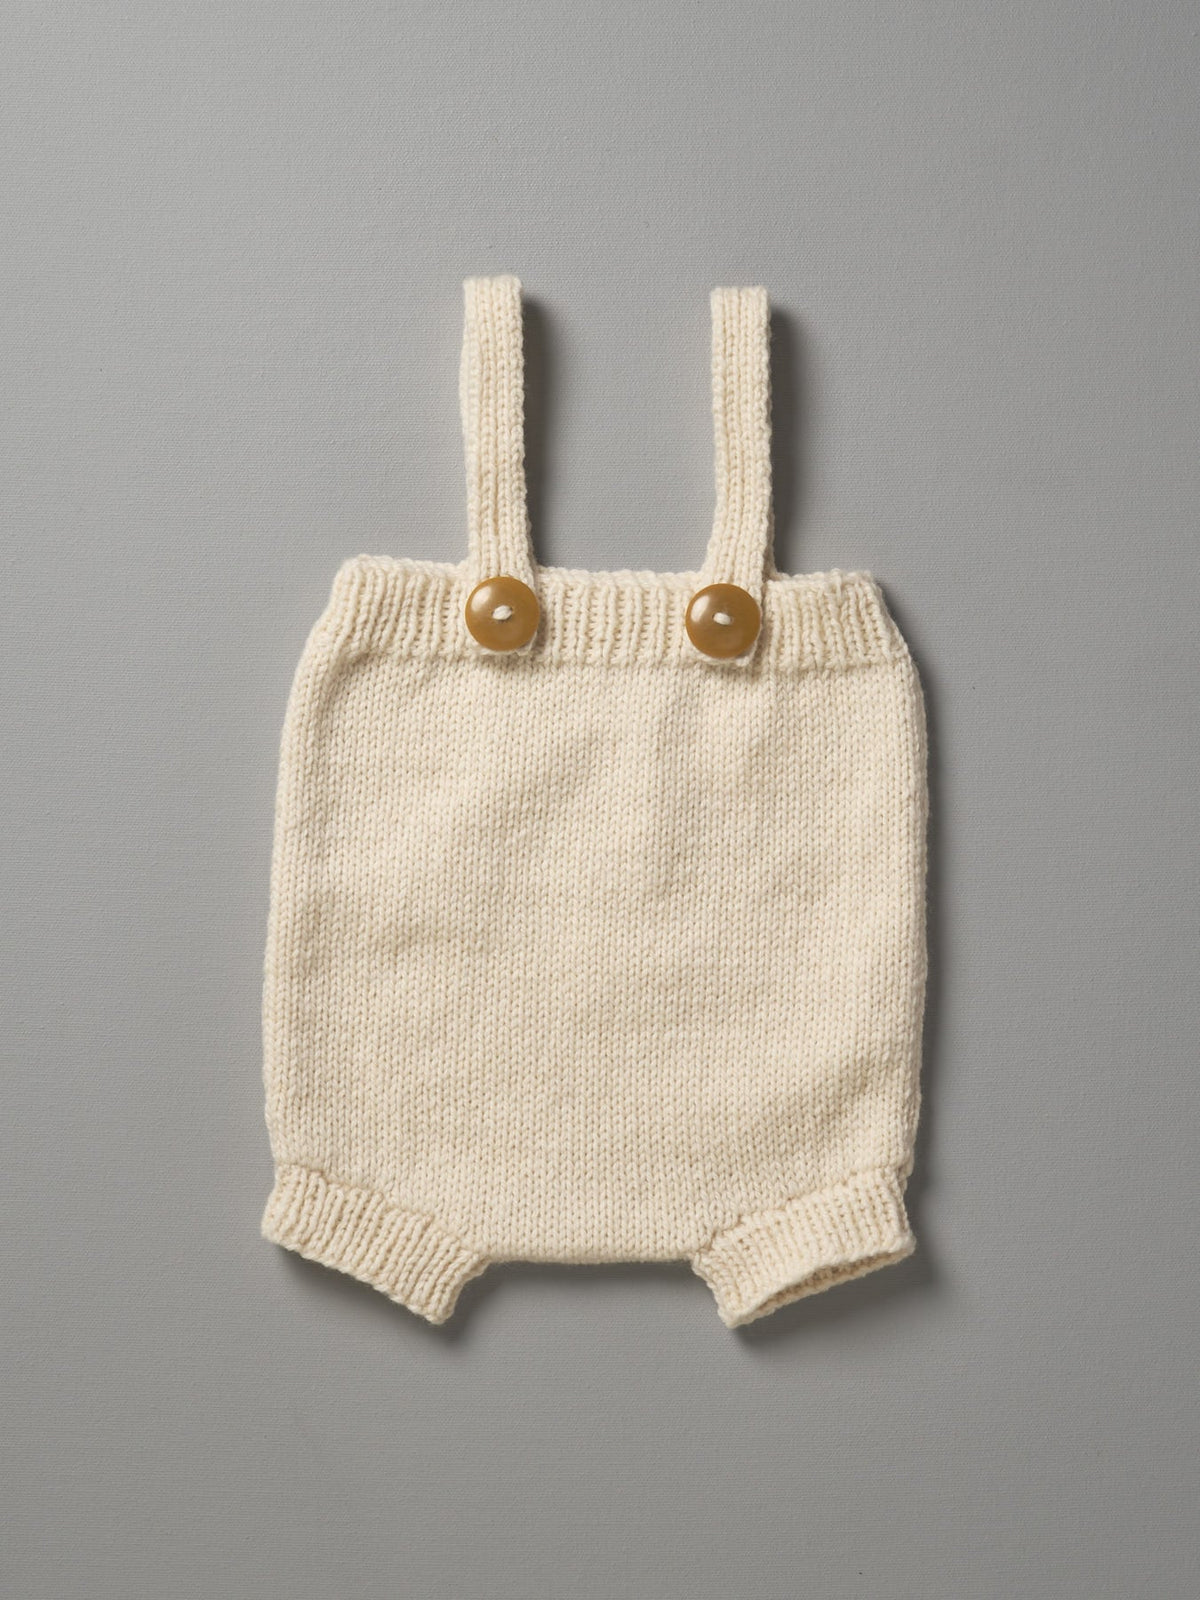 A Weebits Hand Knitted Romper - Natural with buttons on it.